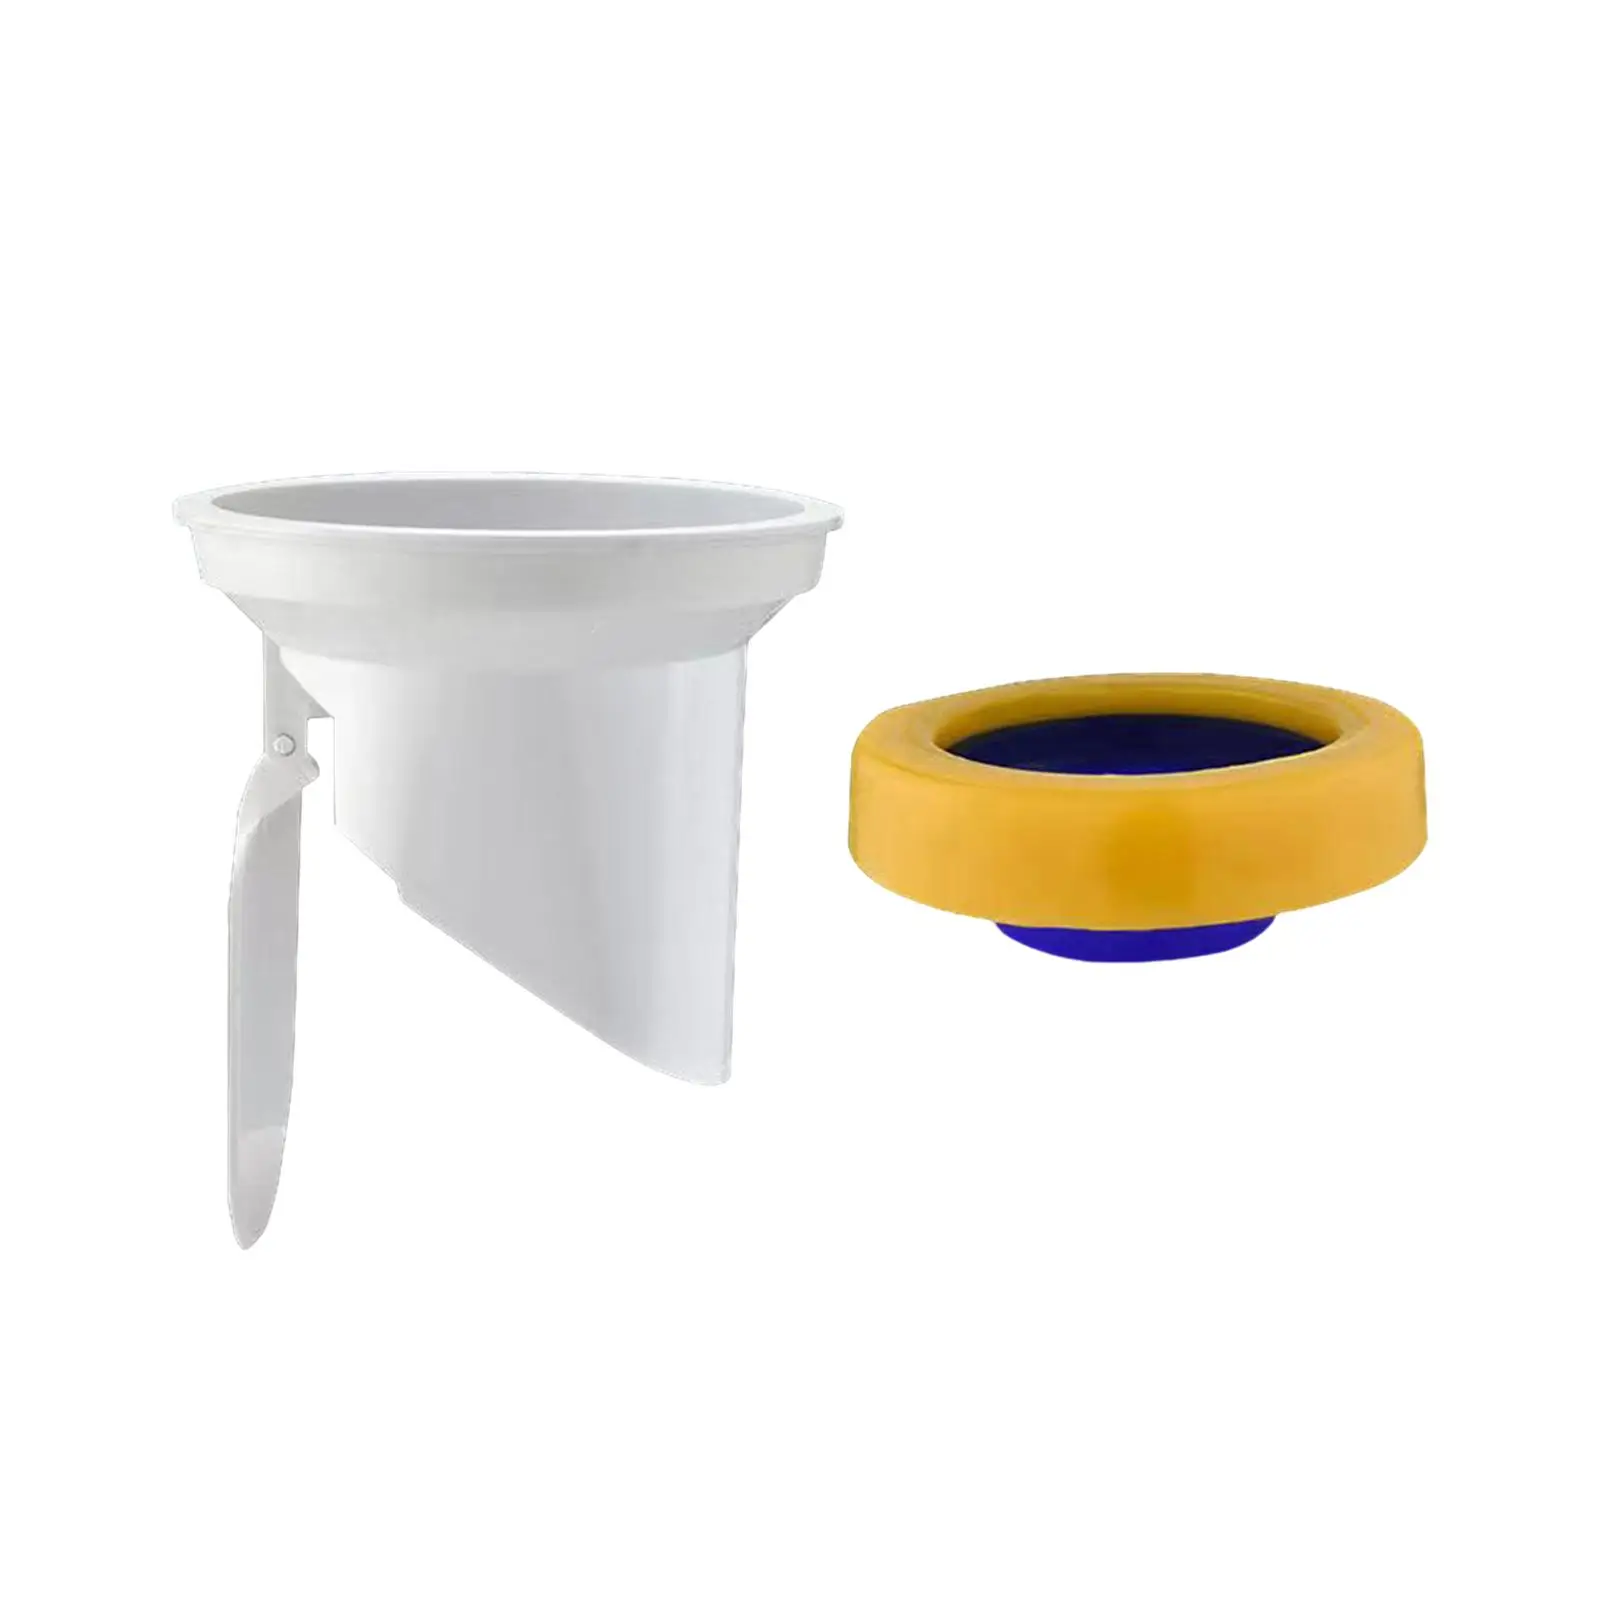 Toilet Flange Ring Durable Silicone Sealing Drain Backflow Preventer Toilet Pits Blocking Odor Plug for Home Repairing Parts